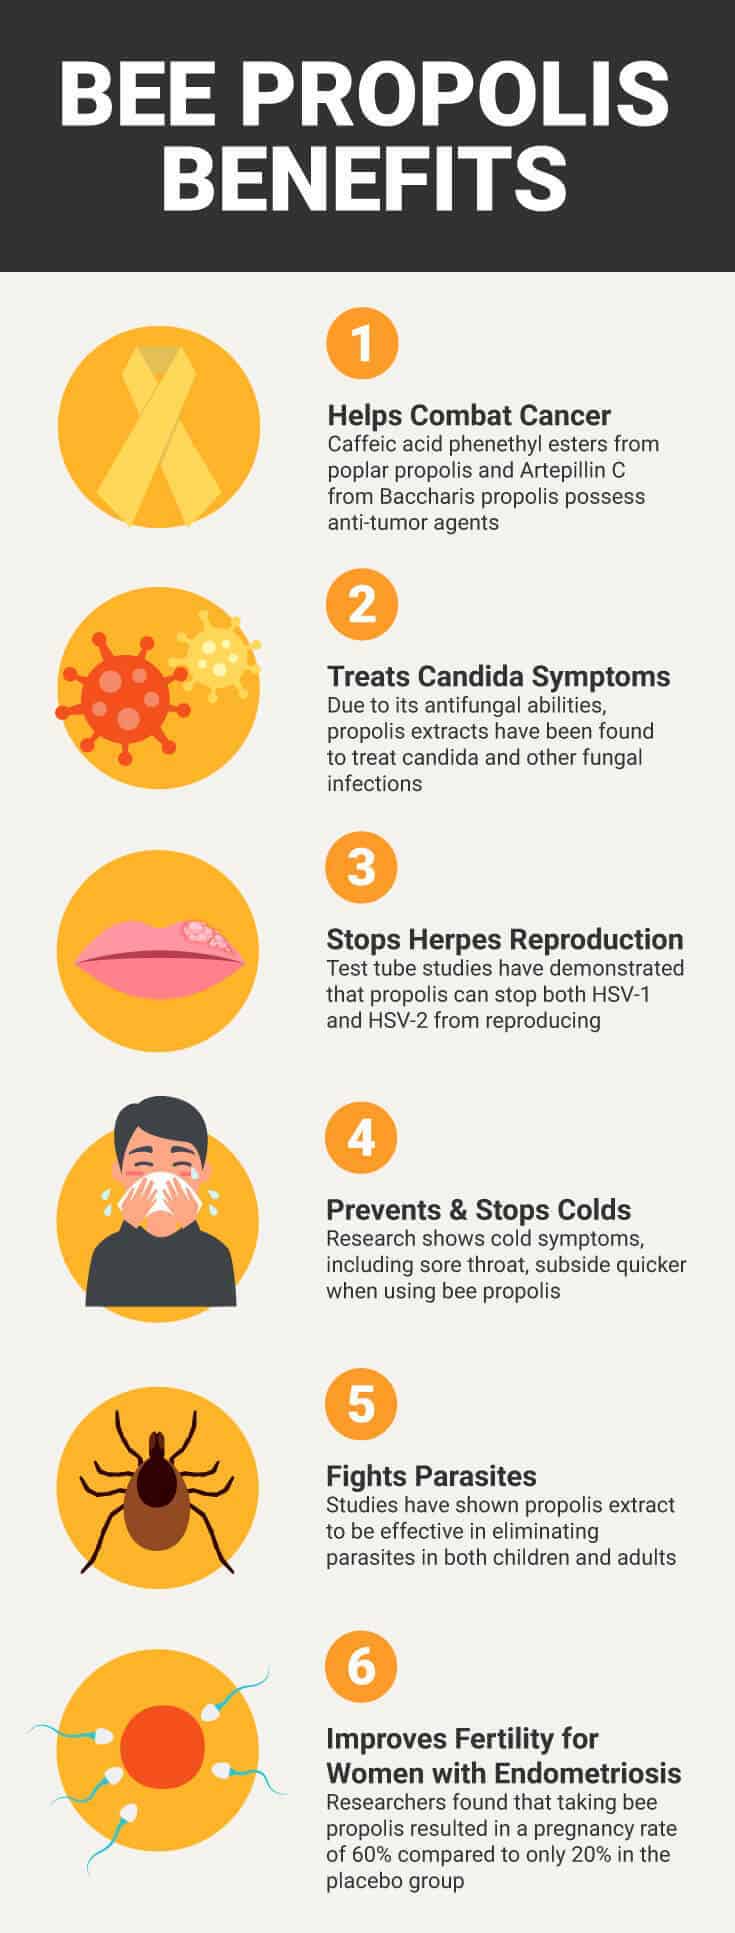 Pine Pollen: Uses, Benefits, Side Effects, Dosage